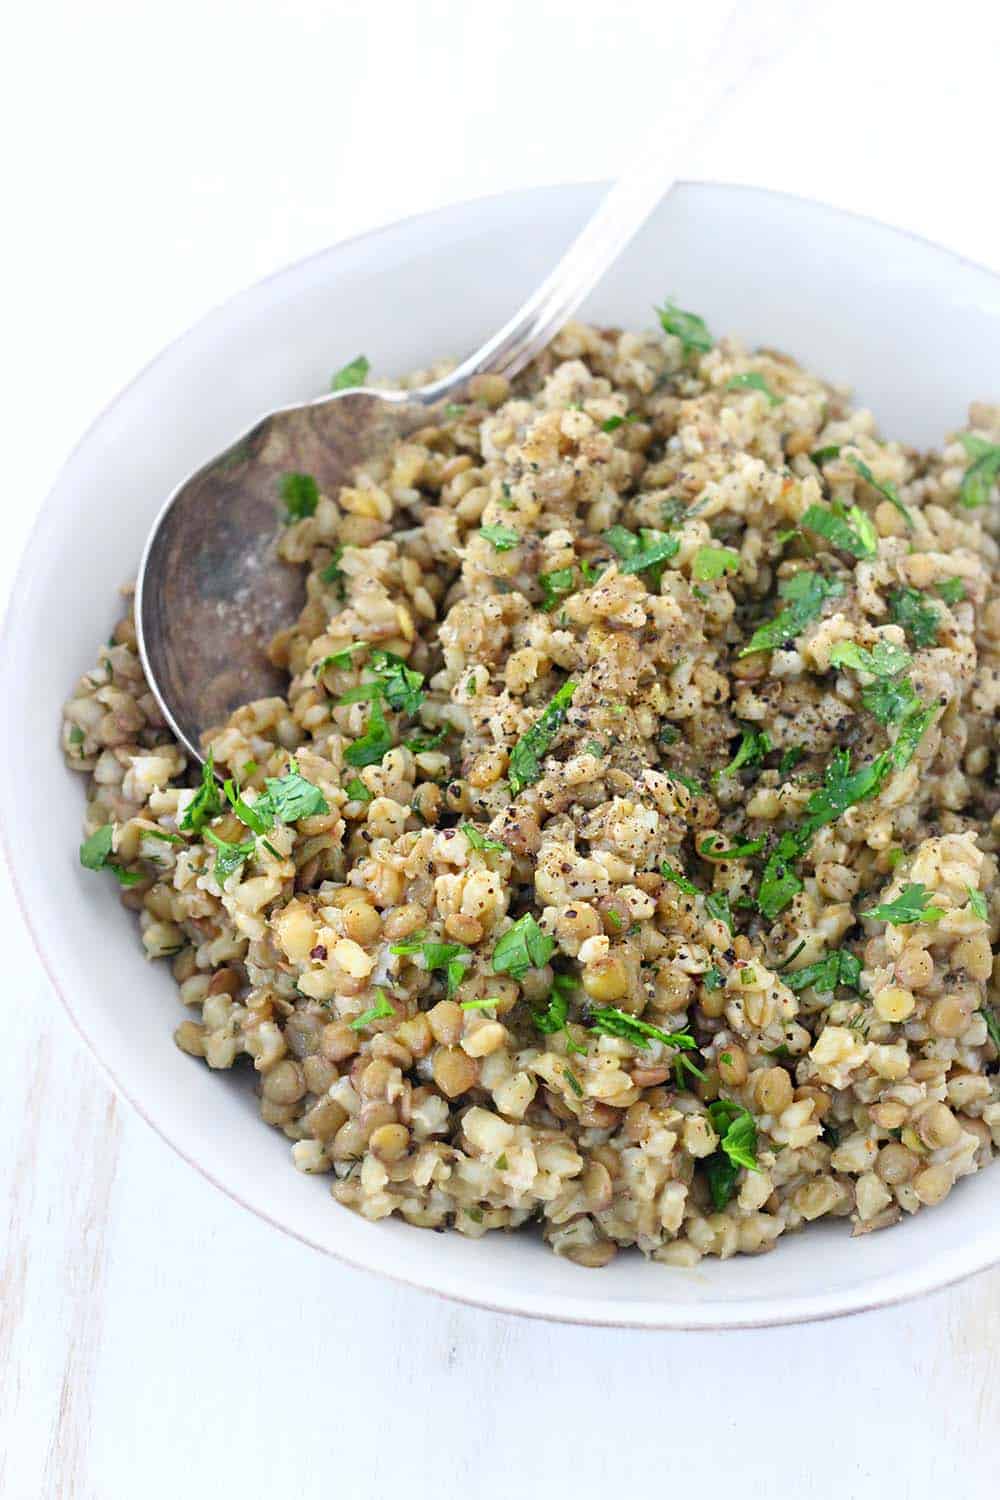 Refreshing, hearty, and healthy, this Barley and Lentil Salad is the perfect vegan side dish or light meal. It's dressed with a delicious and tangy fresh dill vinaigrette, and it's SO inexpensive and easy to make!